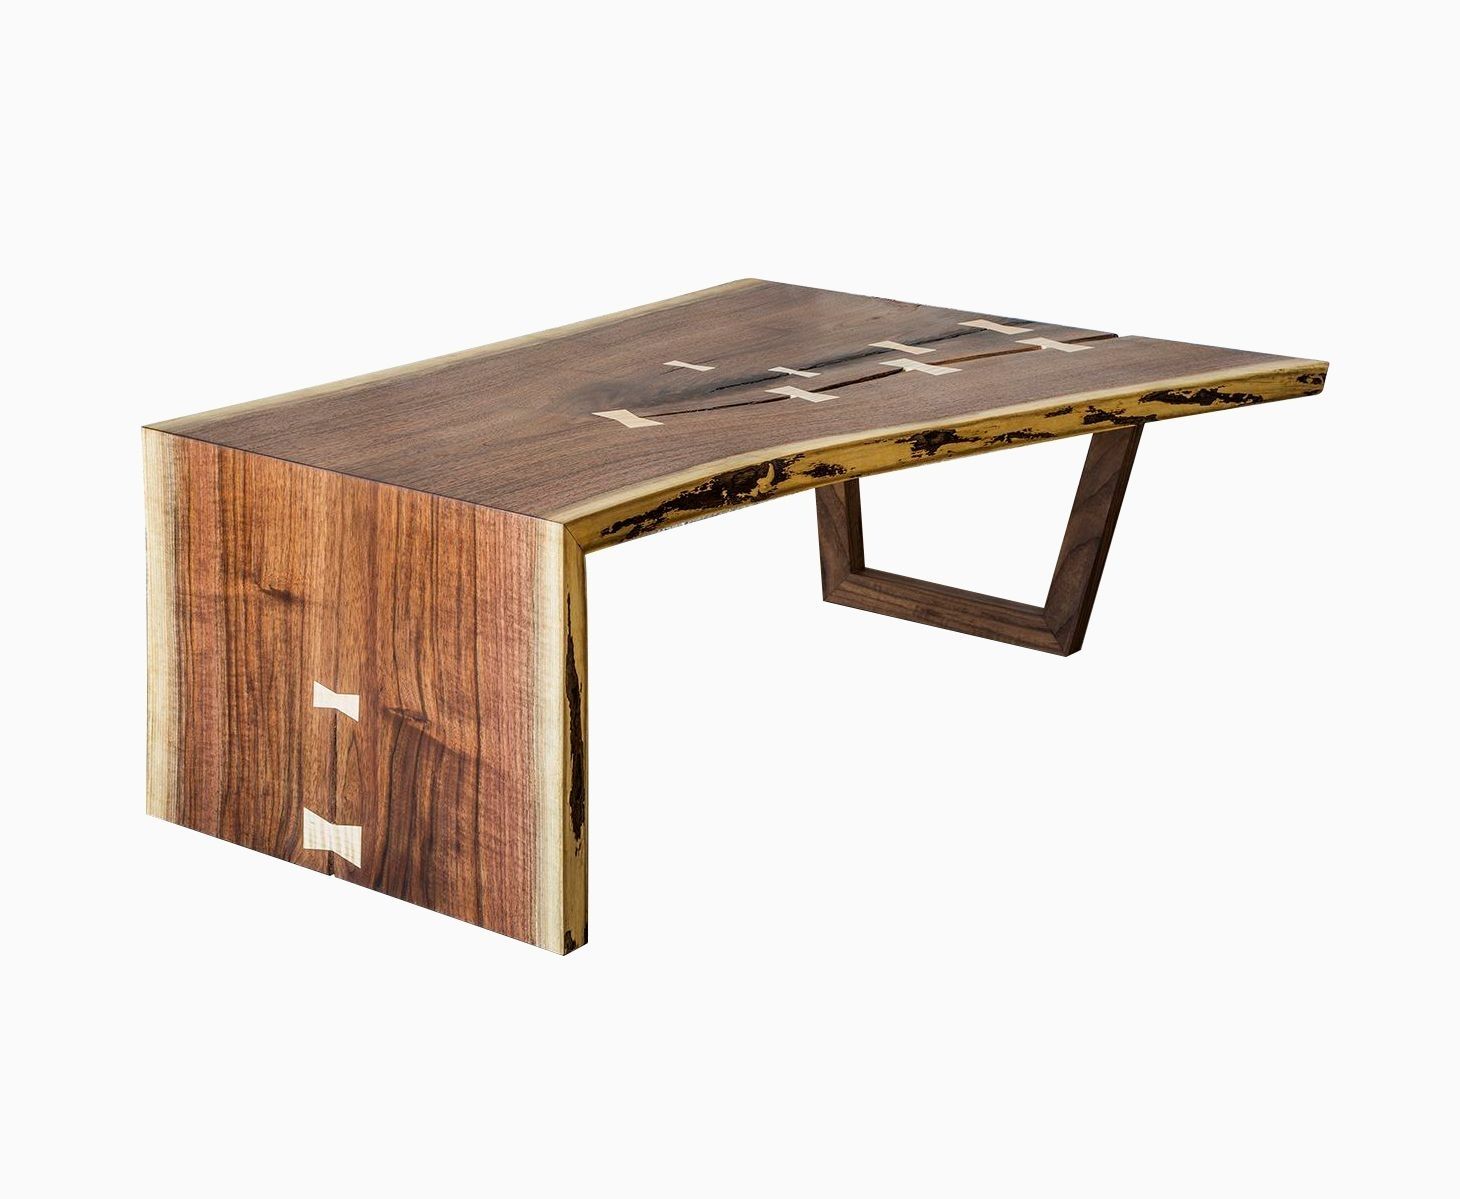 Buy A Hand Crafted Live Edge Walnut Waterfall Coffee Table, Made To Inside Waterfall Coffee Tables (View 1 of 30)